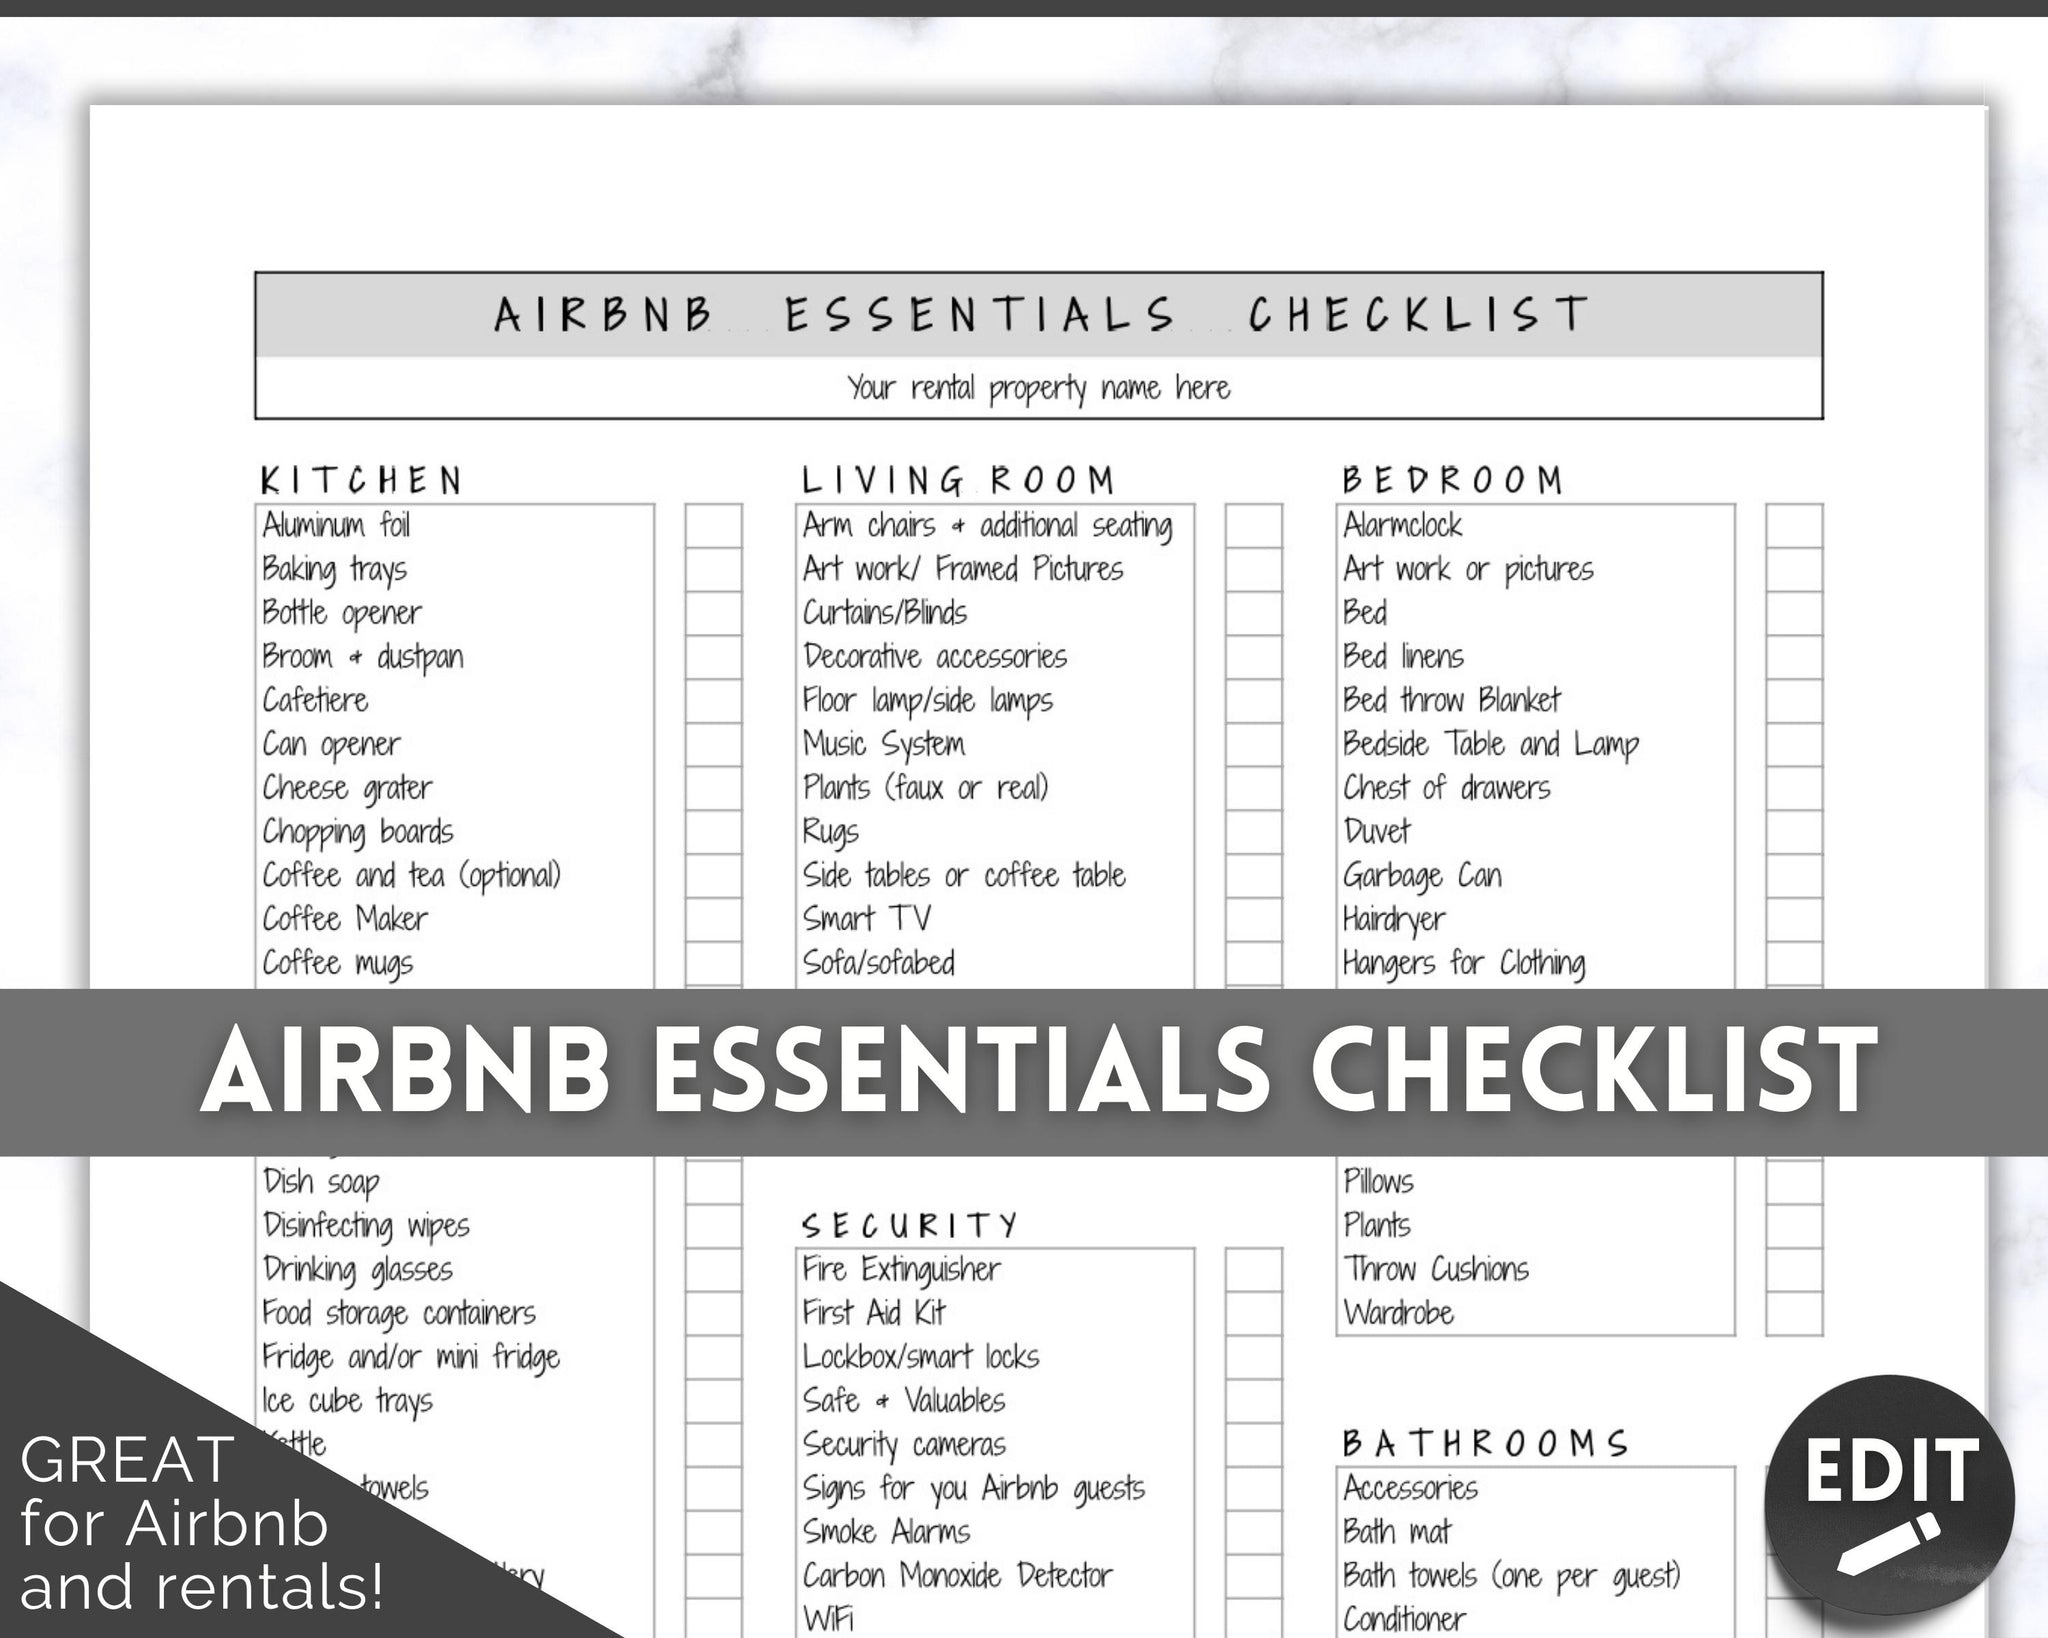 Airbnb Bathroom Essentials: A Trick Sheet for Vacation Rental Hosts